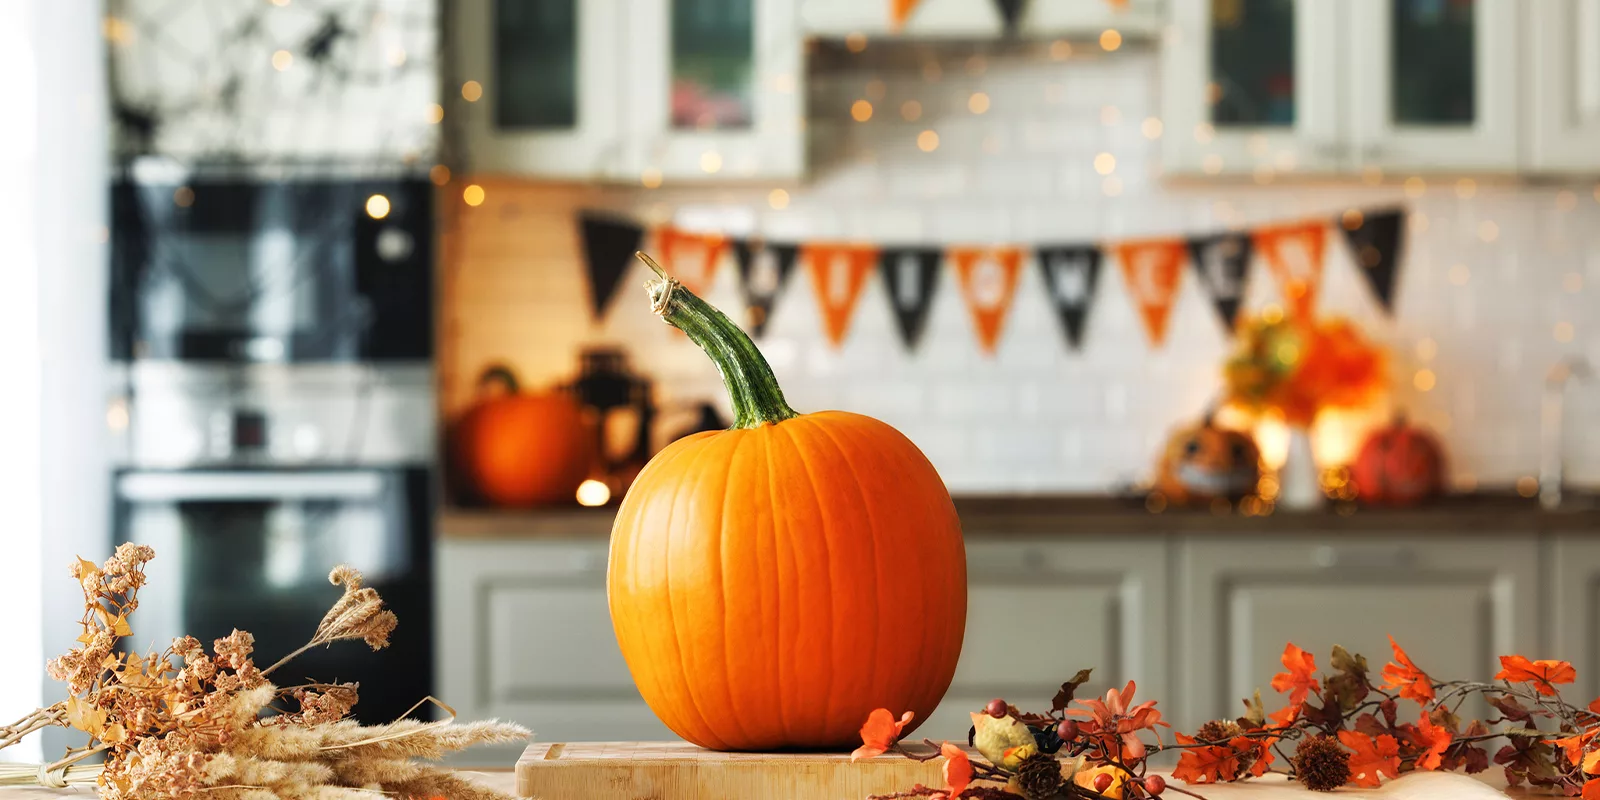 A pumpkin sits on a table in a kitchen decorated for Halloween